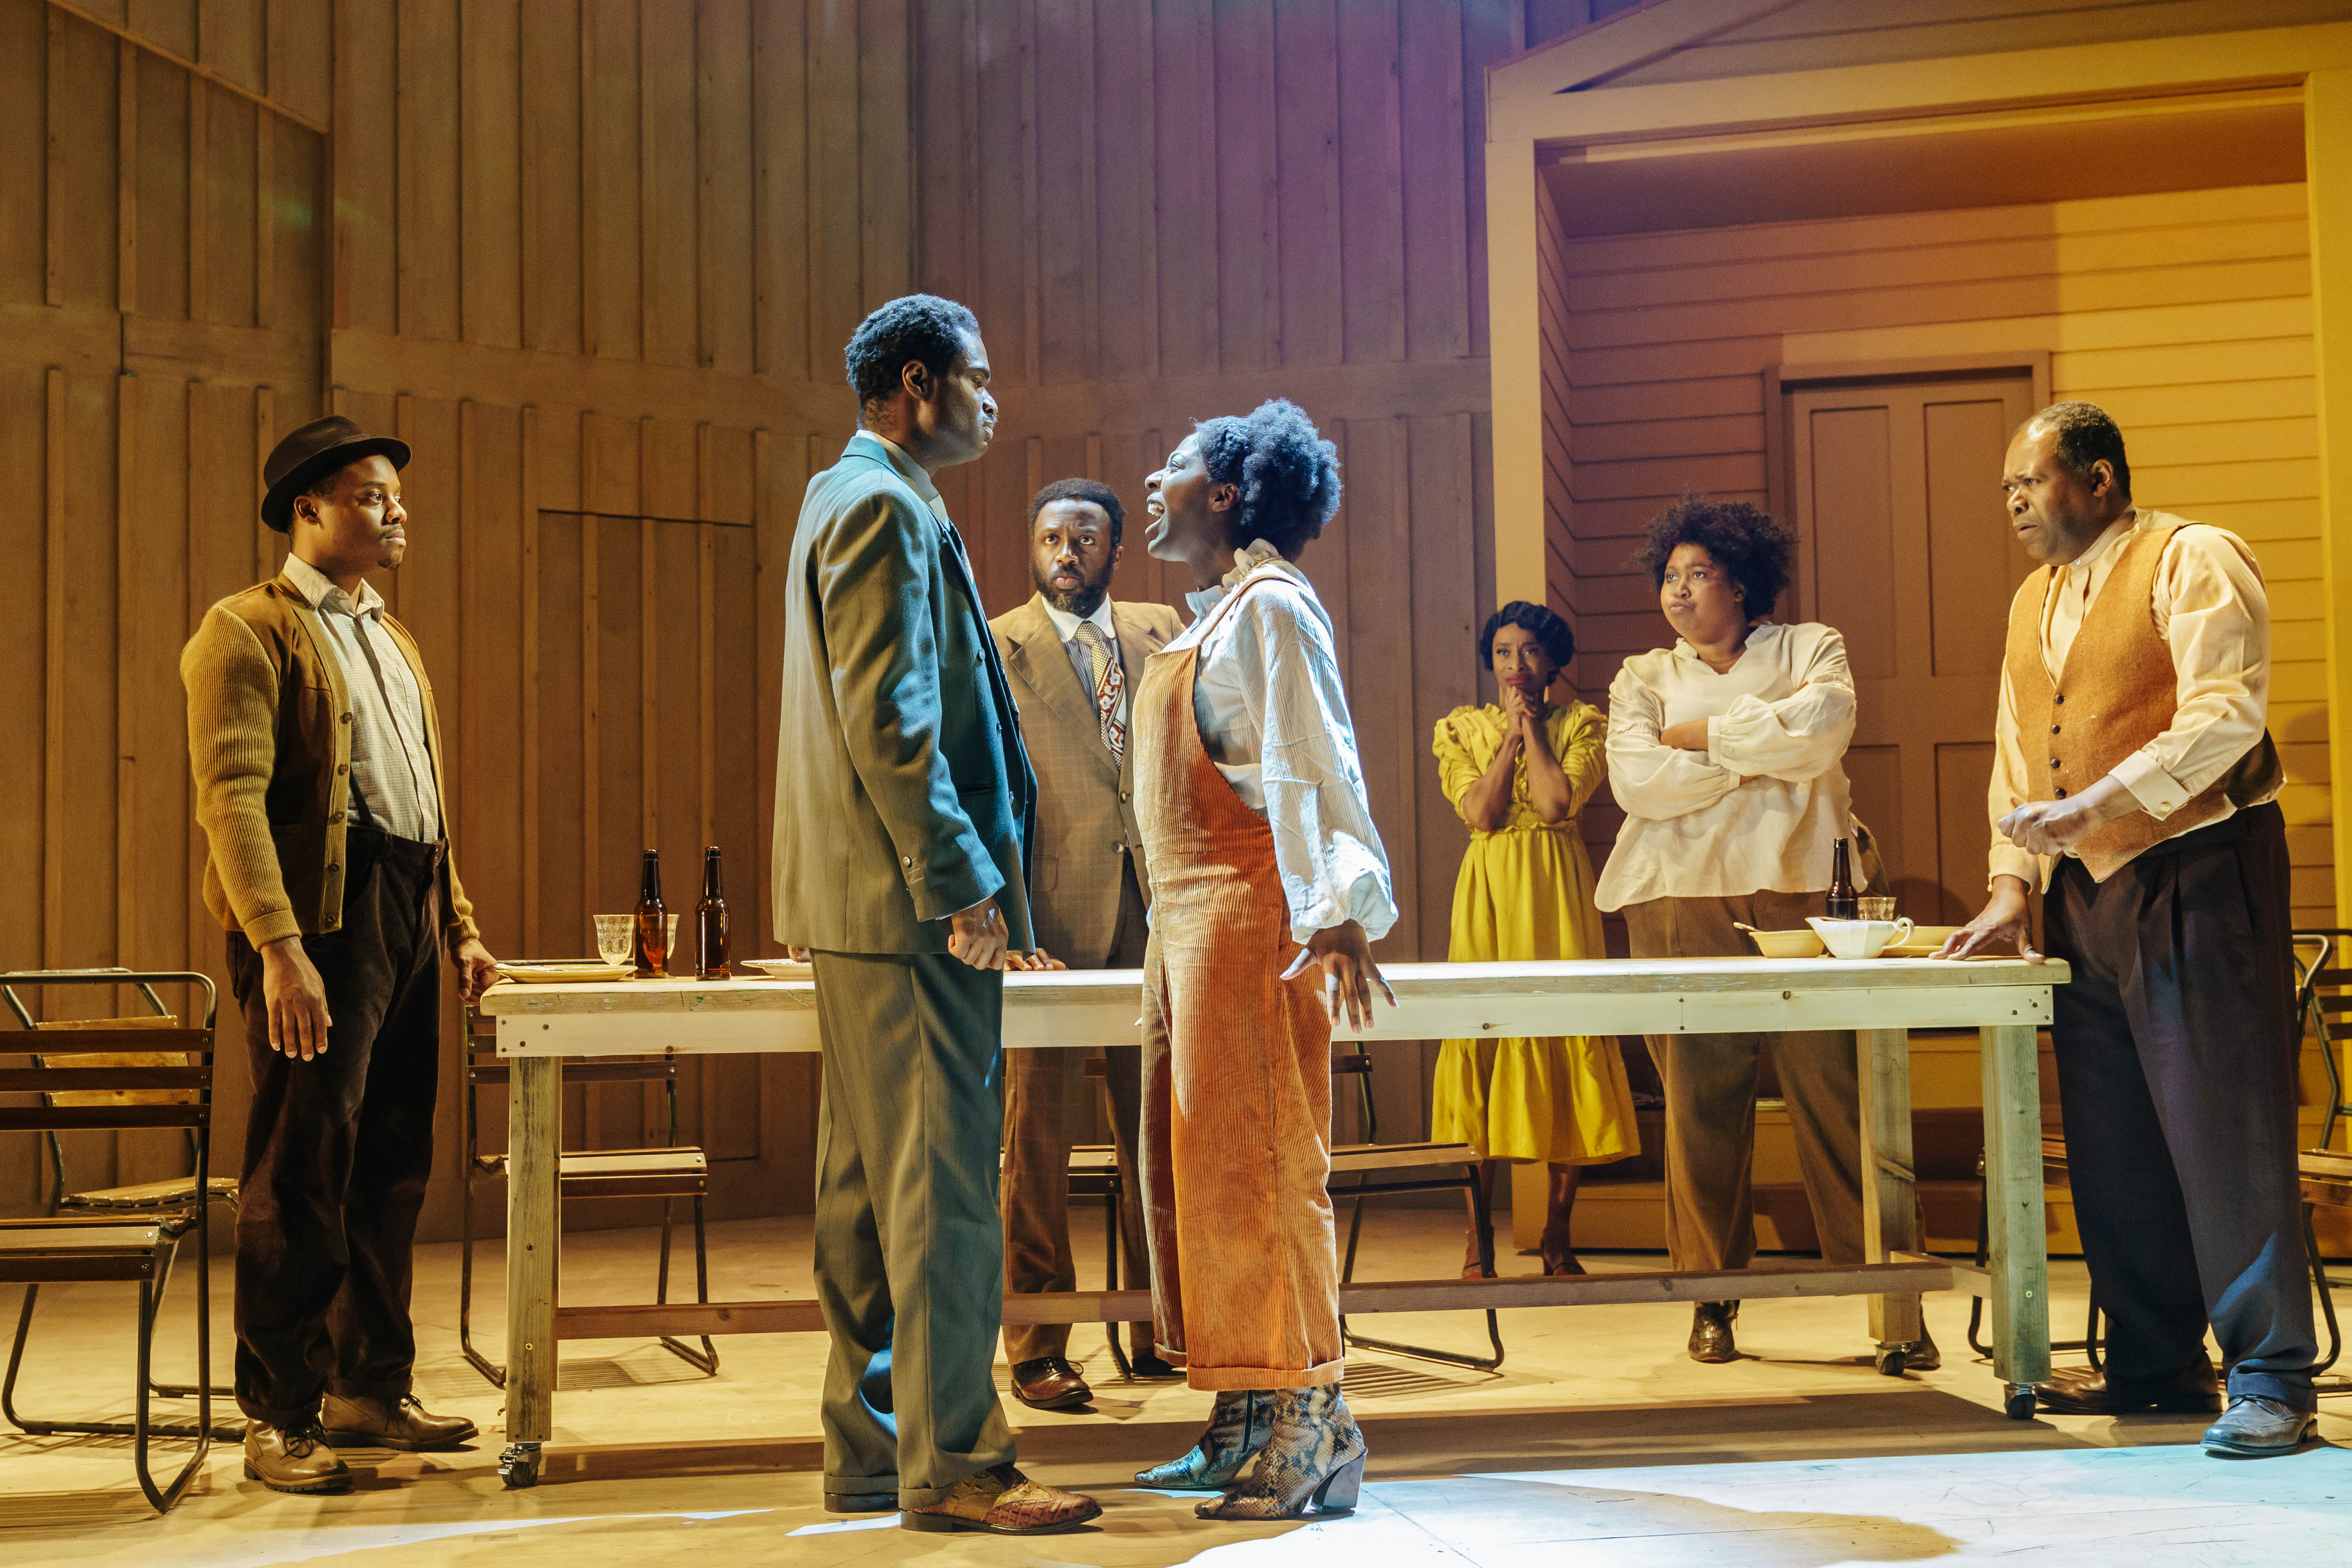 Production image from The Color Purple. Celie (T'Shan Williams) yells at Mister (Ako Mitchell) as five others watch on behind a table. The stage is lit in brown and gold hues.